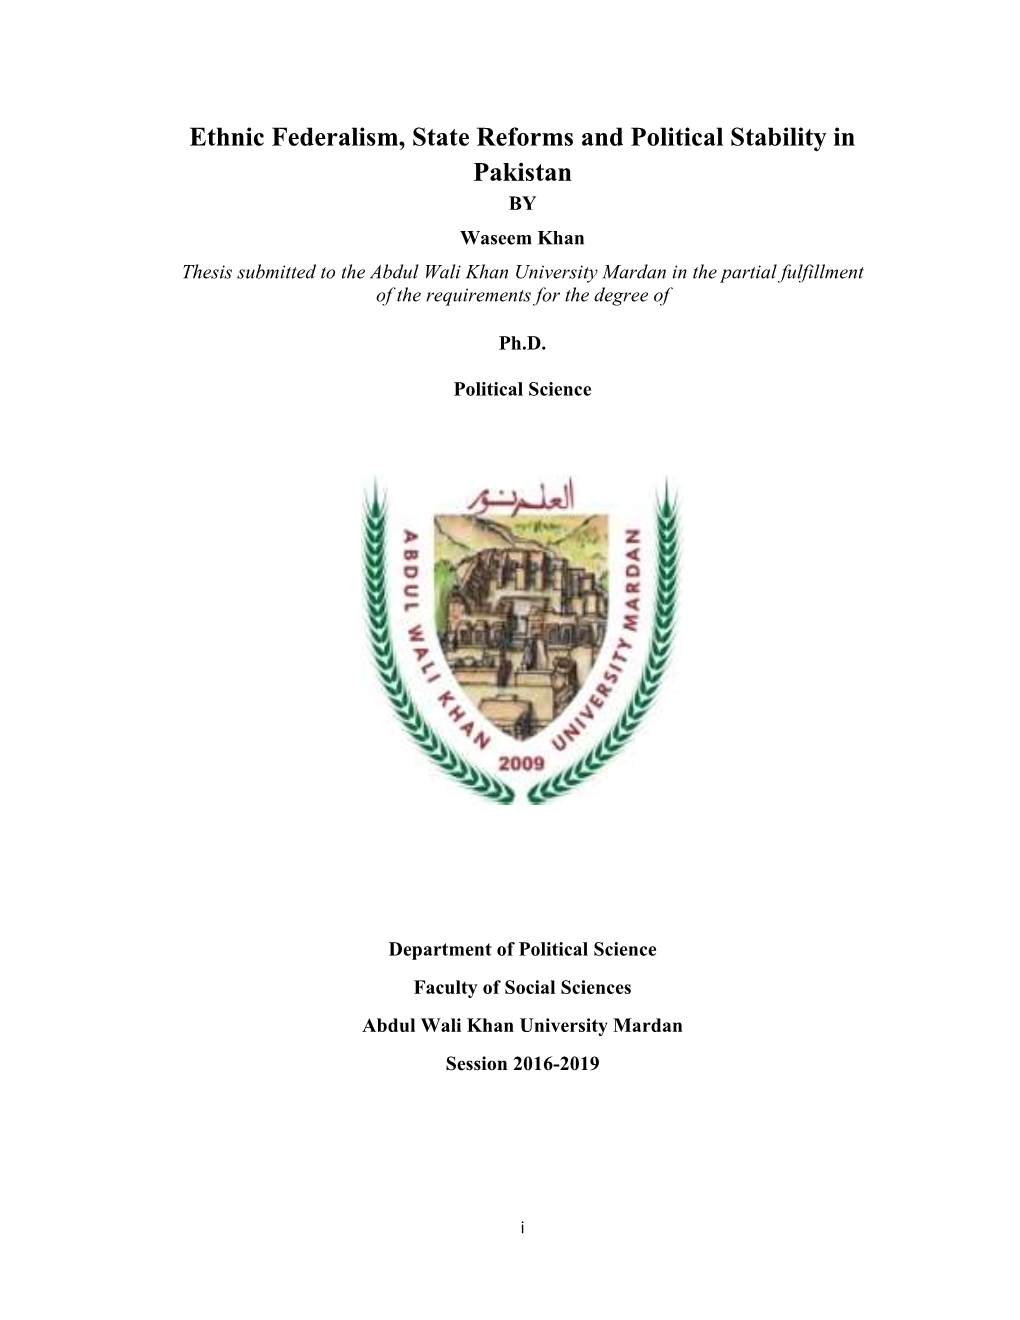 Ethnic Federalism, State Reforms and Political Stability in Pakistan